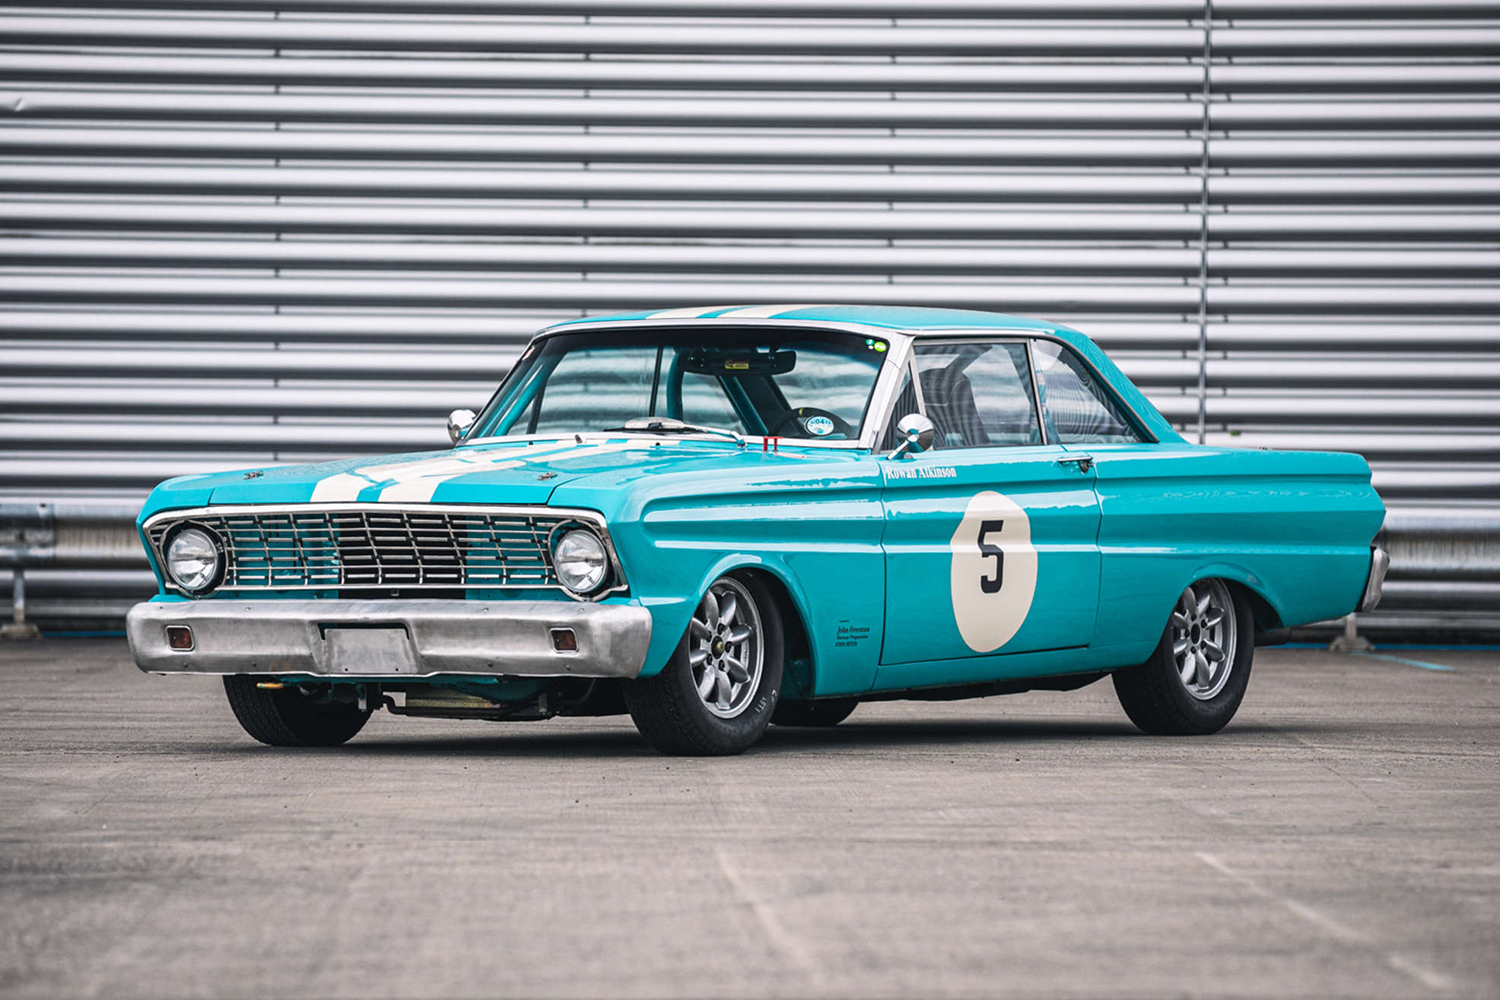 The turquoise 1964 Ford Falcon FIA race car owned by Rowan Atkinson